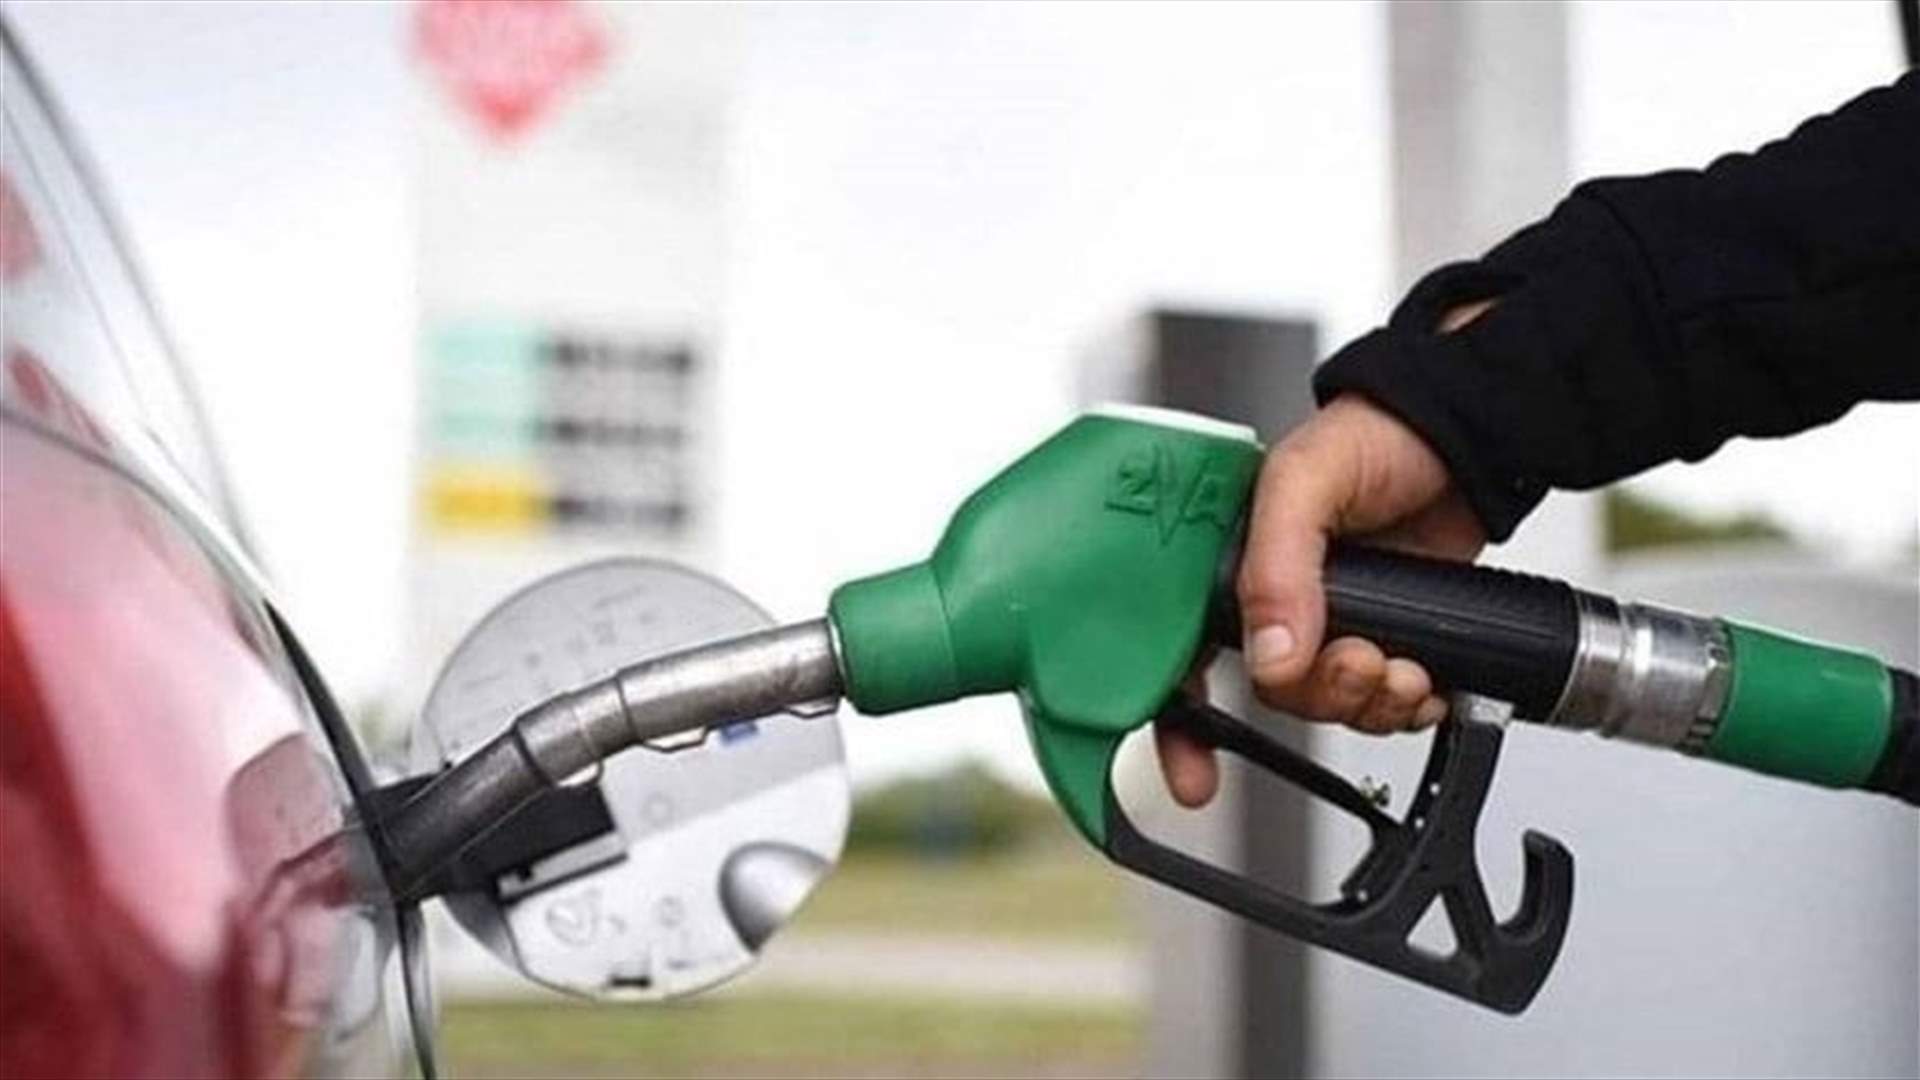 Fall in fuel prices across Lebanon